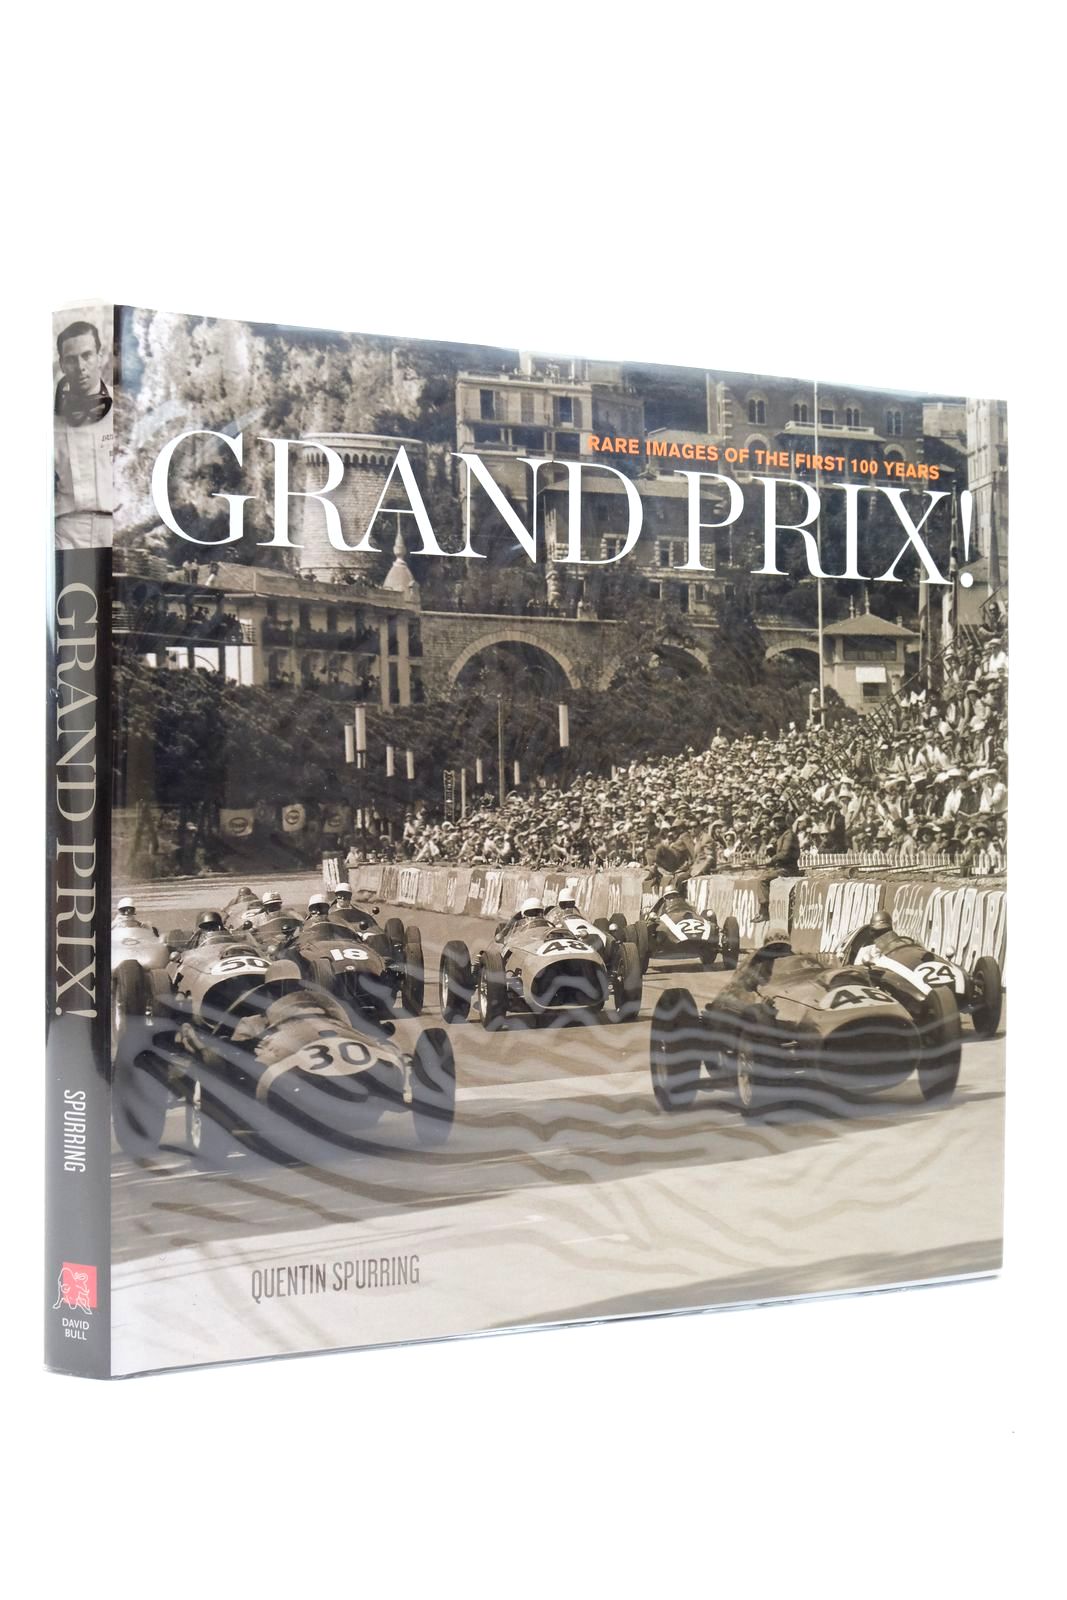 Photo of GRAND PRIX! RARE IMAGES OF THE FIRST 100 YEARS- Stock Number: 2138741